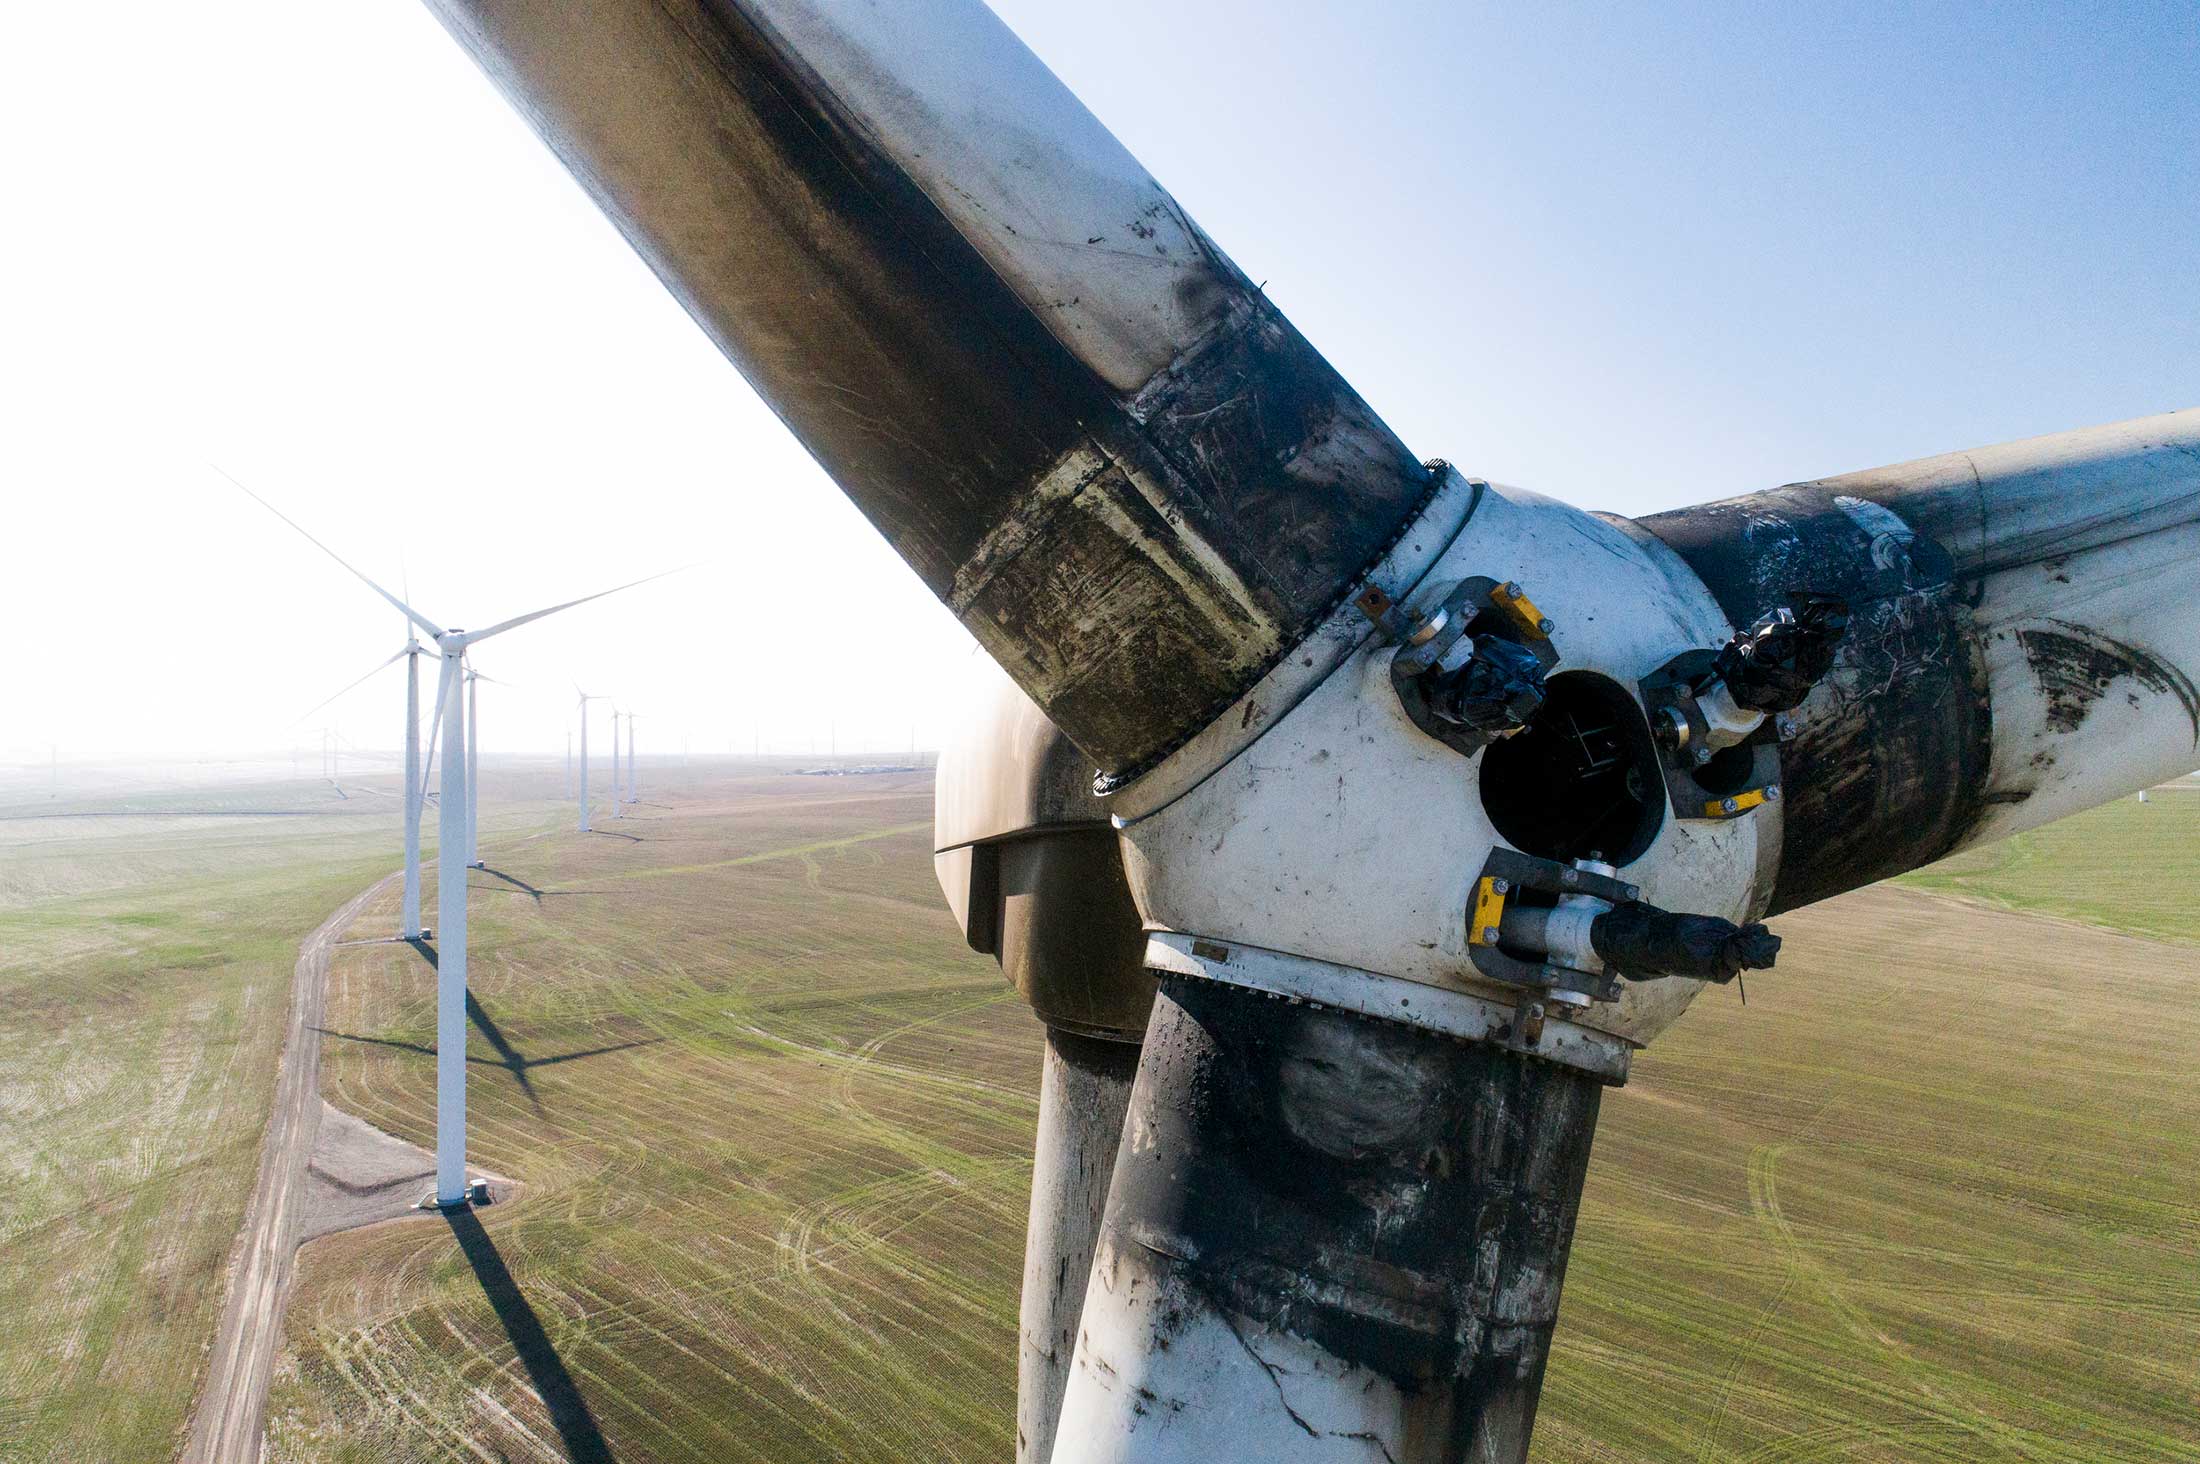 South America - Installed wind power capacity in Brazil surpassed